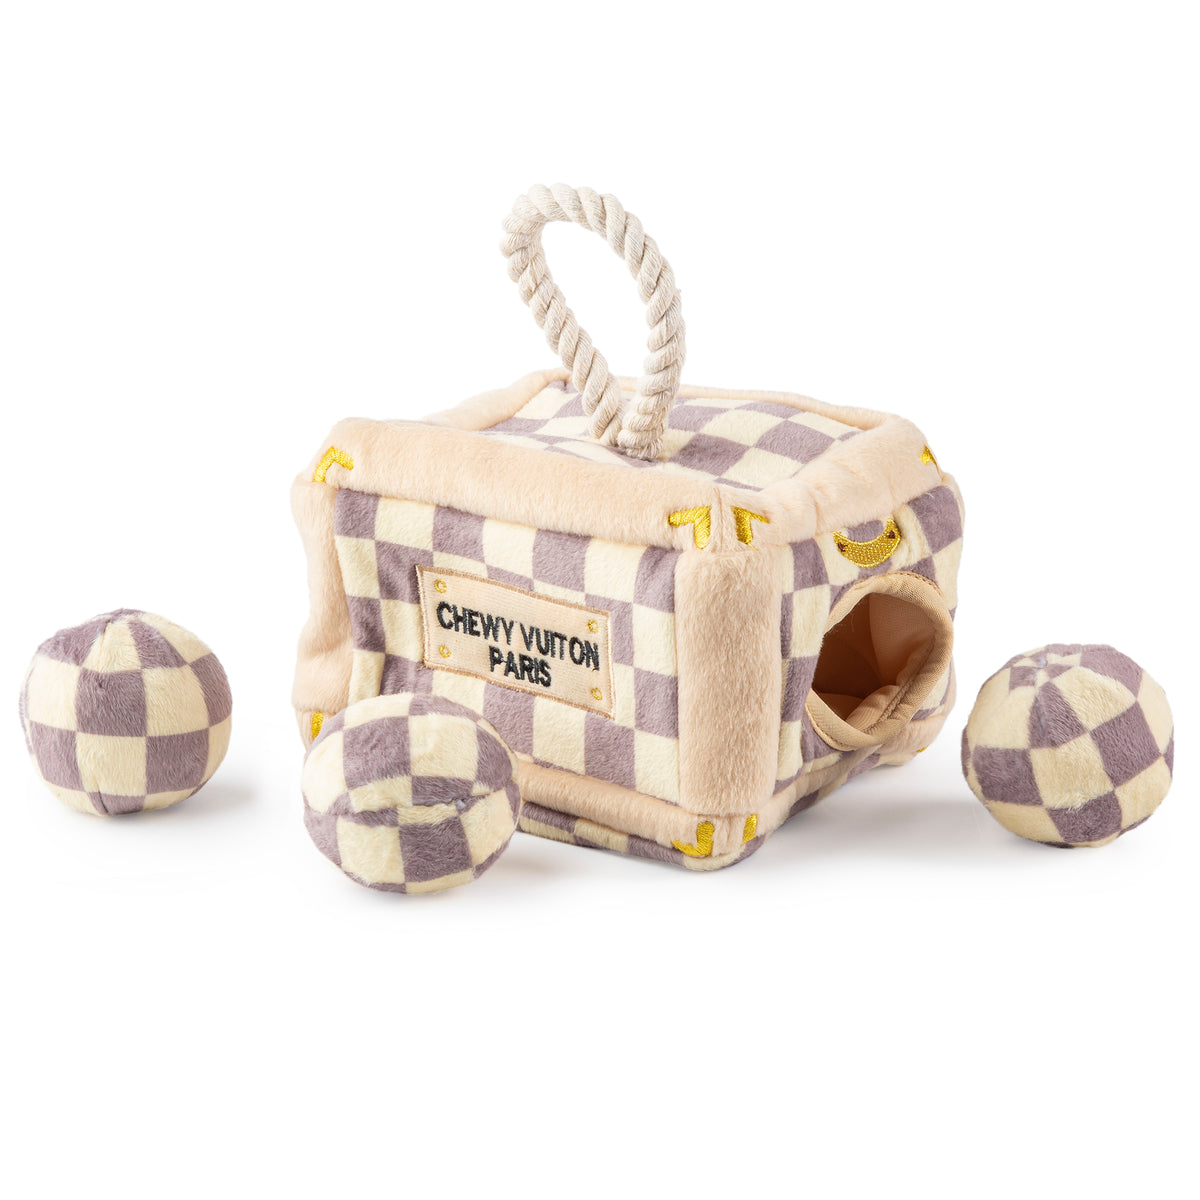 Chewy Vuitton Ball Toy – Maison53